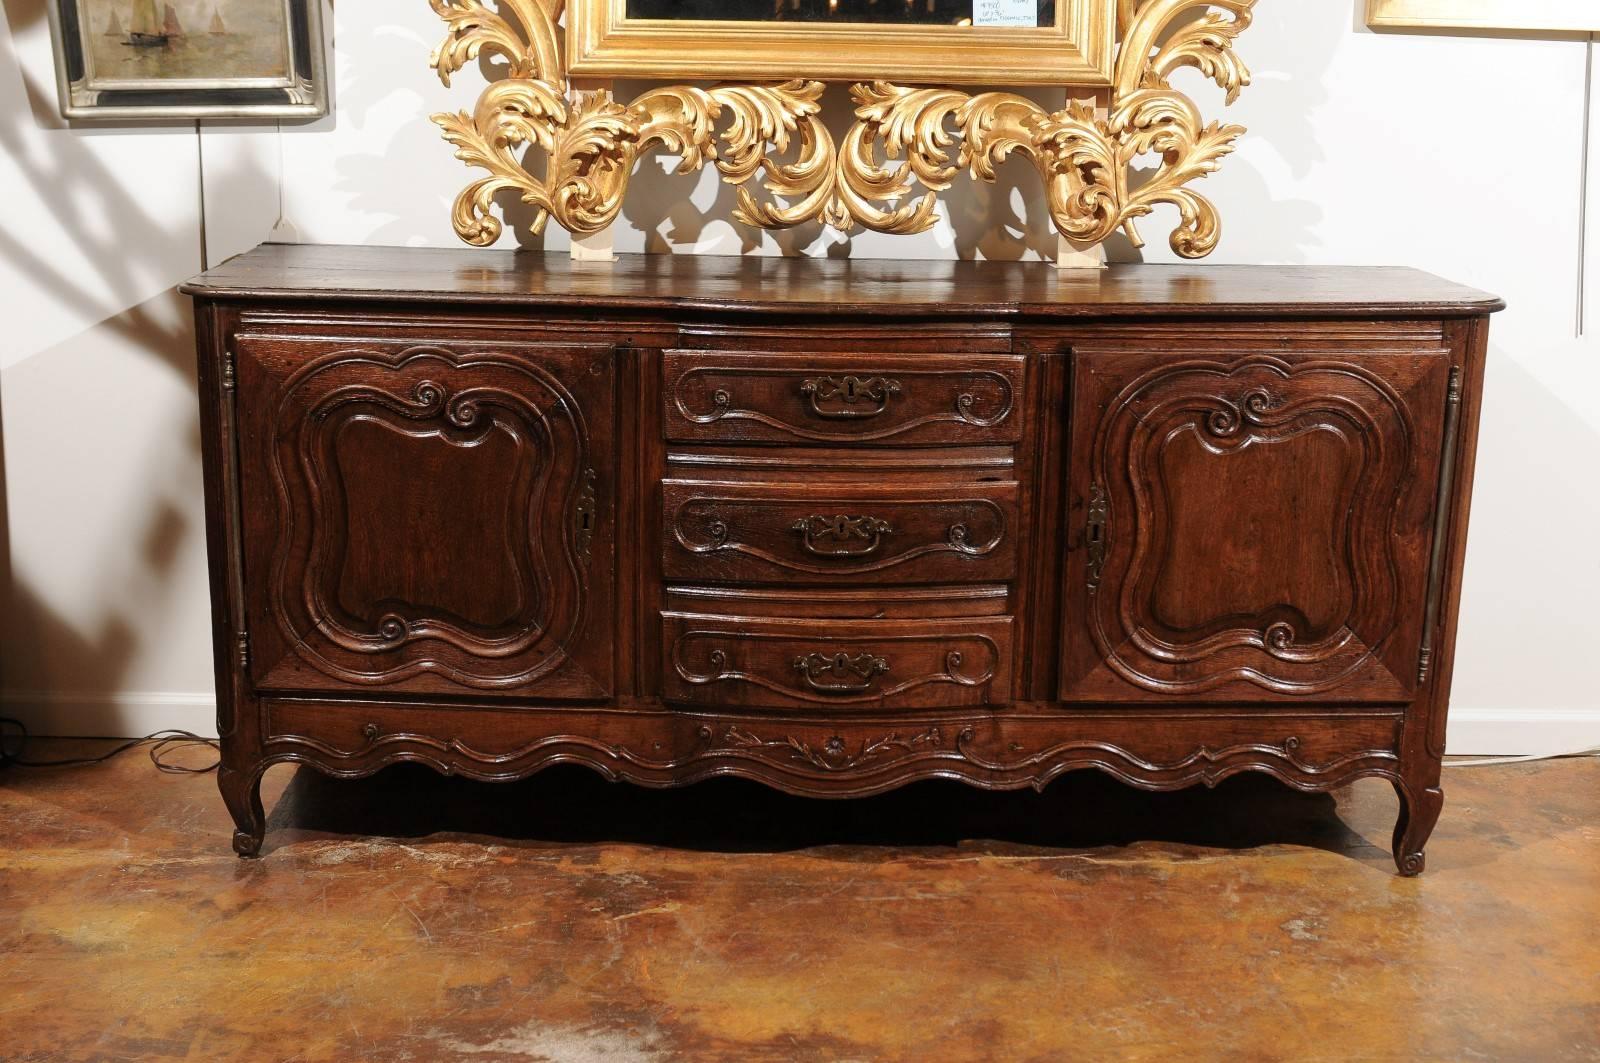 A French Louis XV style two-door and three-drawer sideboard in ¼ sawn oak from the second half of the 18th century. This exquisite French oak sideboard features a shaped top with rounded edges sitting above two doors flanking three central drawers.